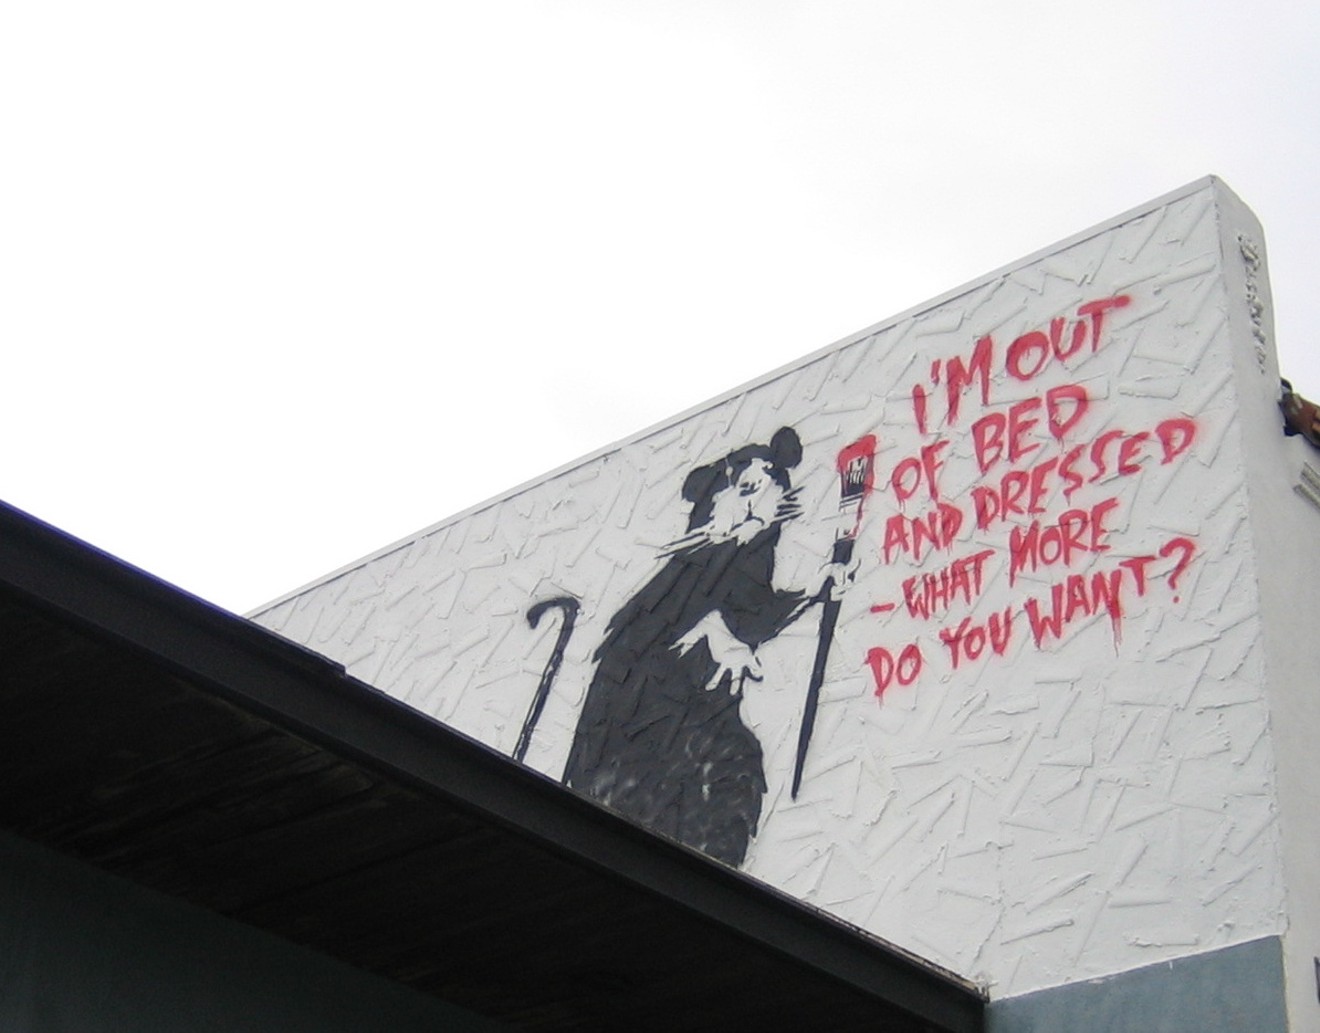 A mural attributed to Banksy in Los Angeles.